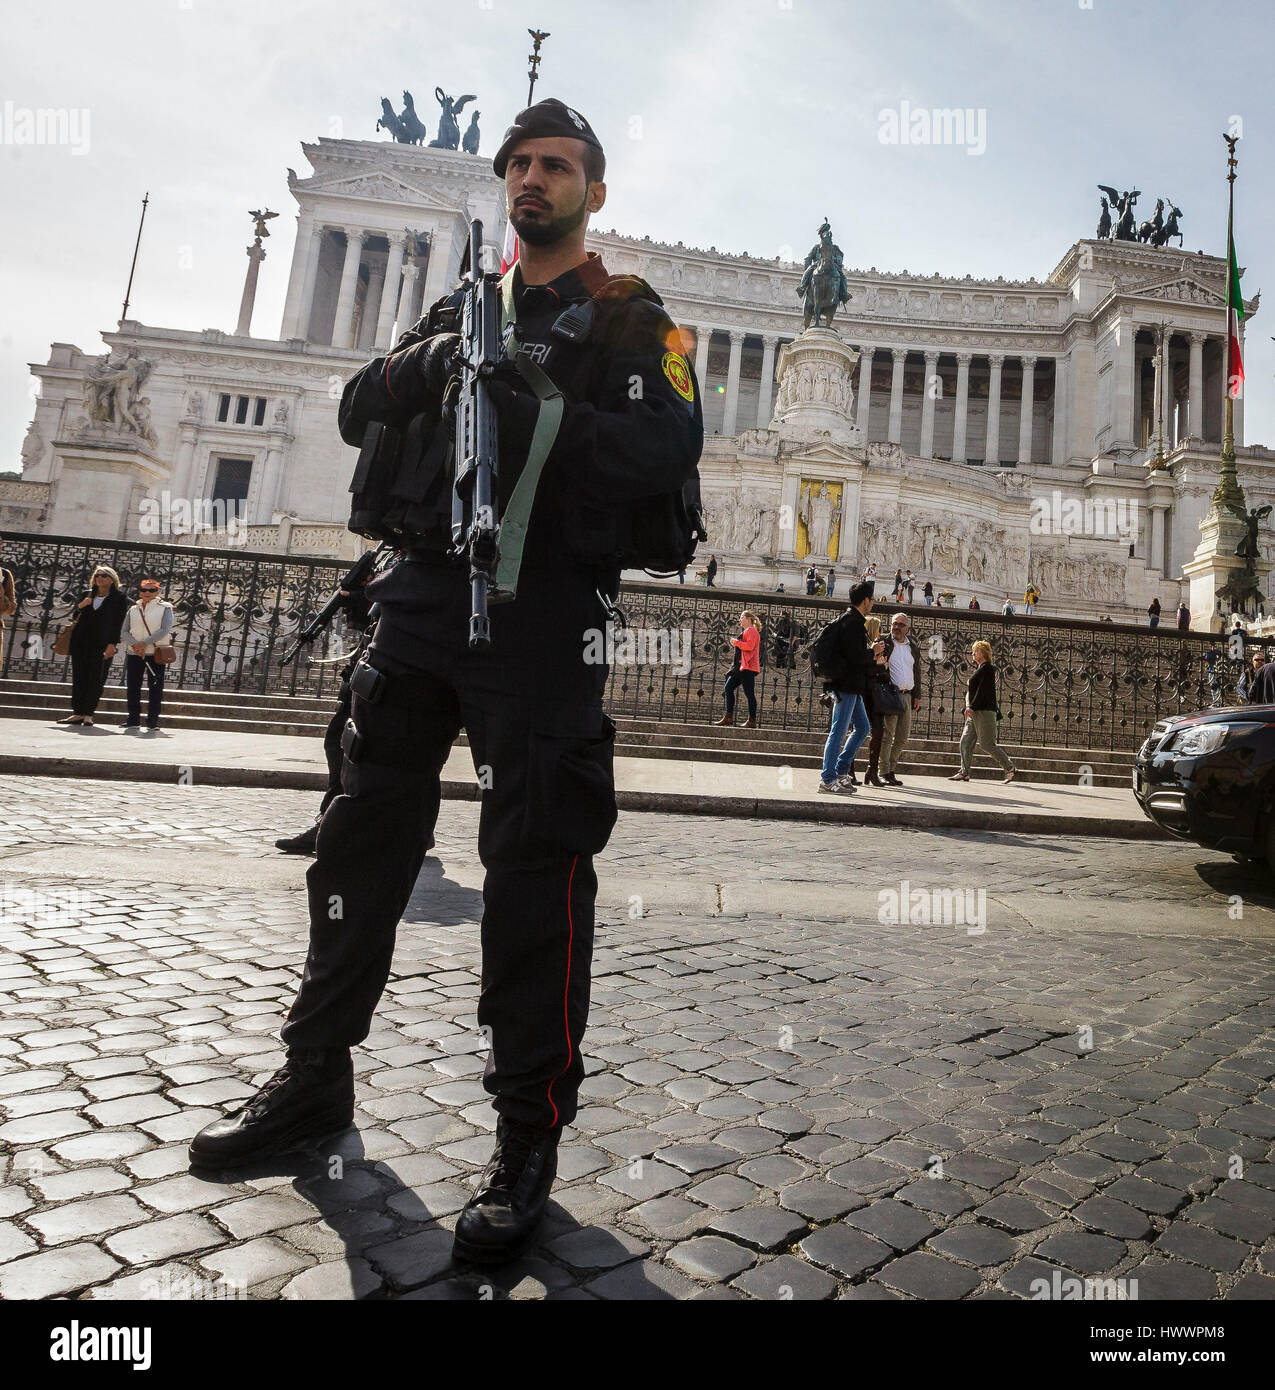 Rome, Italy. 24th March, 2017. Italian paramilitary police patrol  (Carabinieri) stands in front of the Monument of the Unknown Soldier in  Piazza Venezia Square a day ahead of an European Union summit